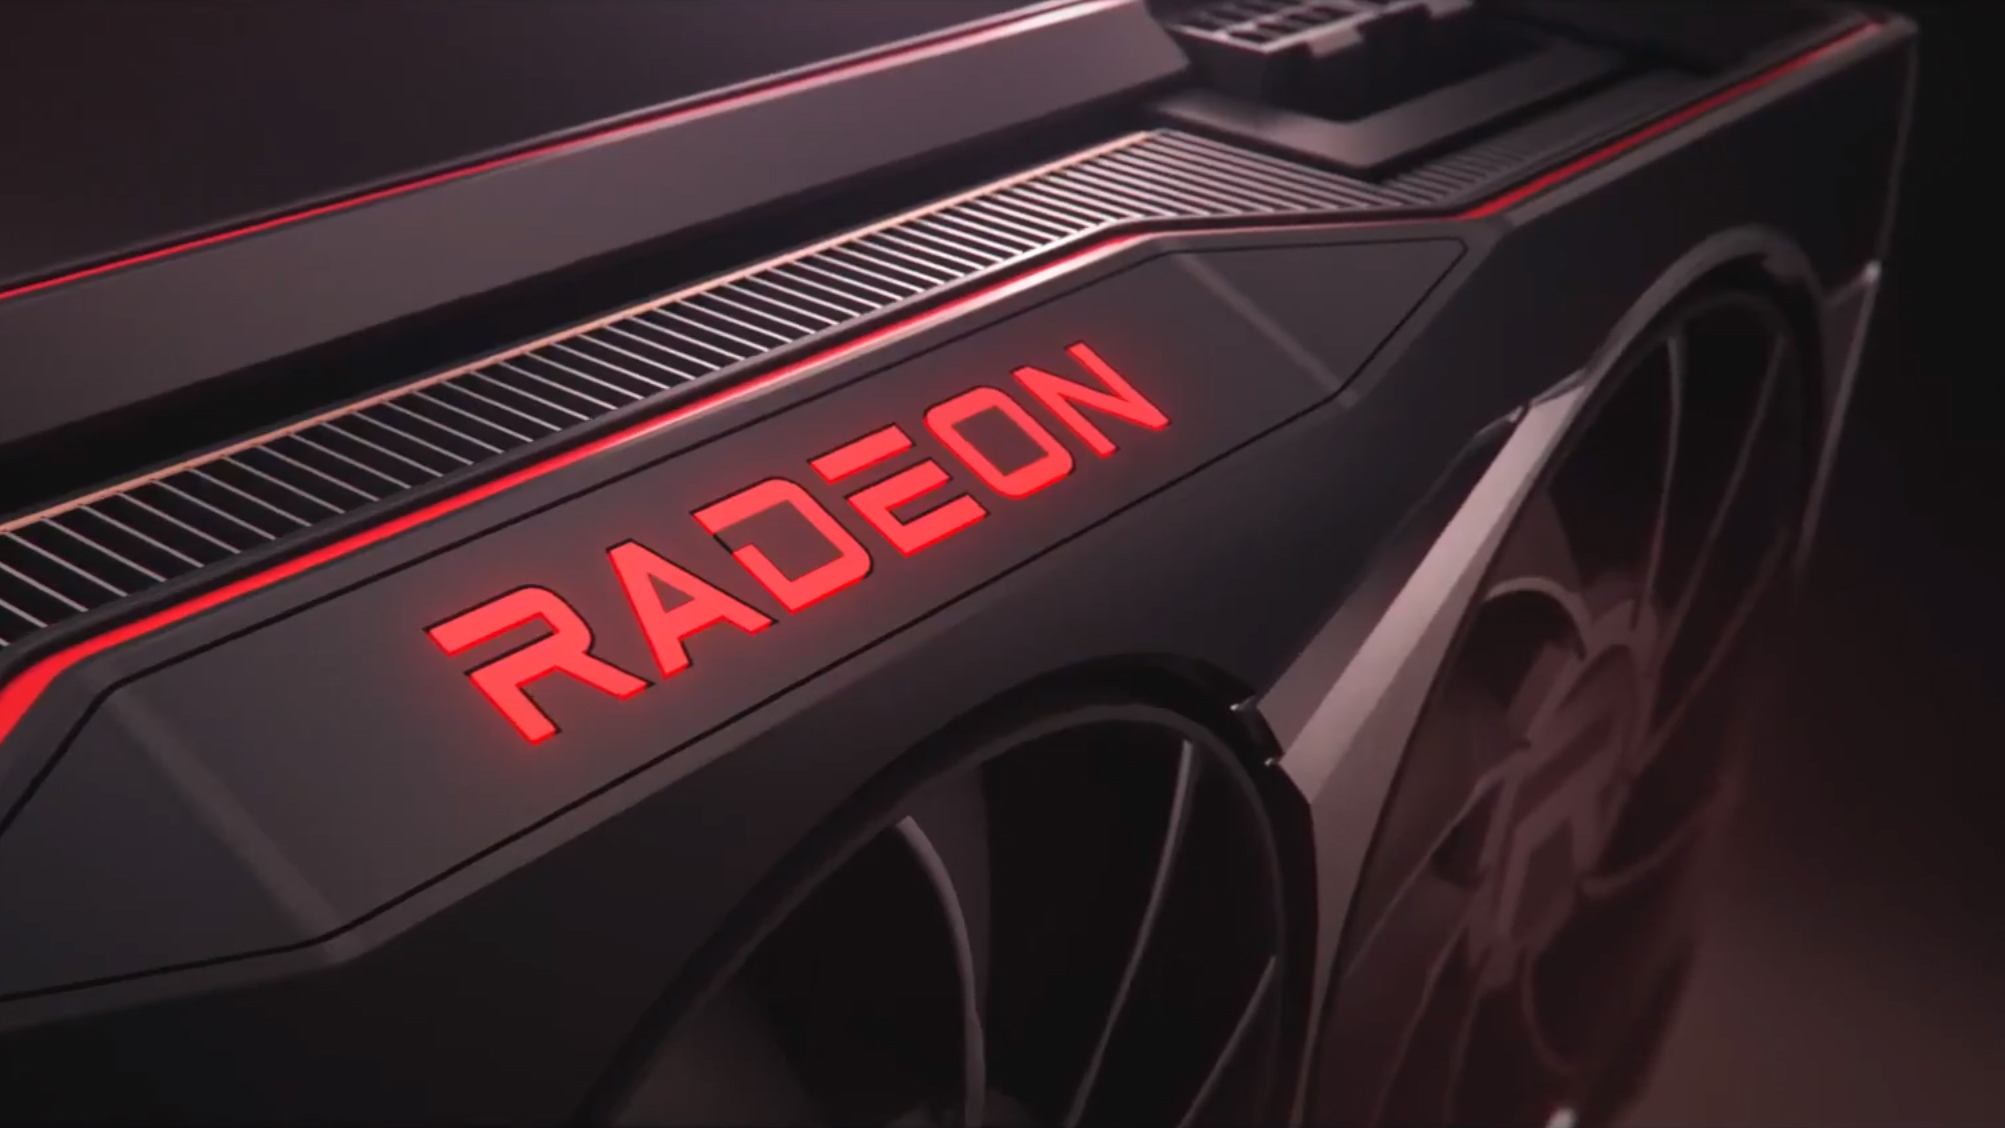 The Next Gen Amd Gpu That Pc Gamers Want Most Might Not Be Out Until 2023